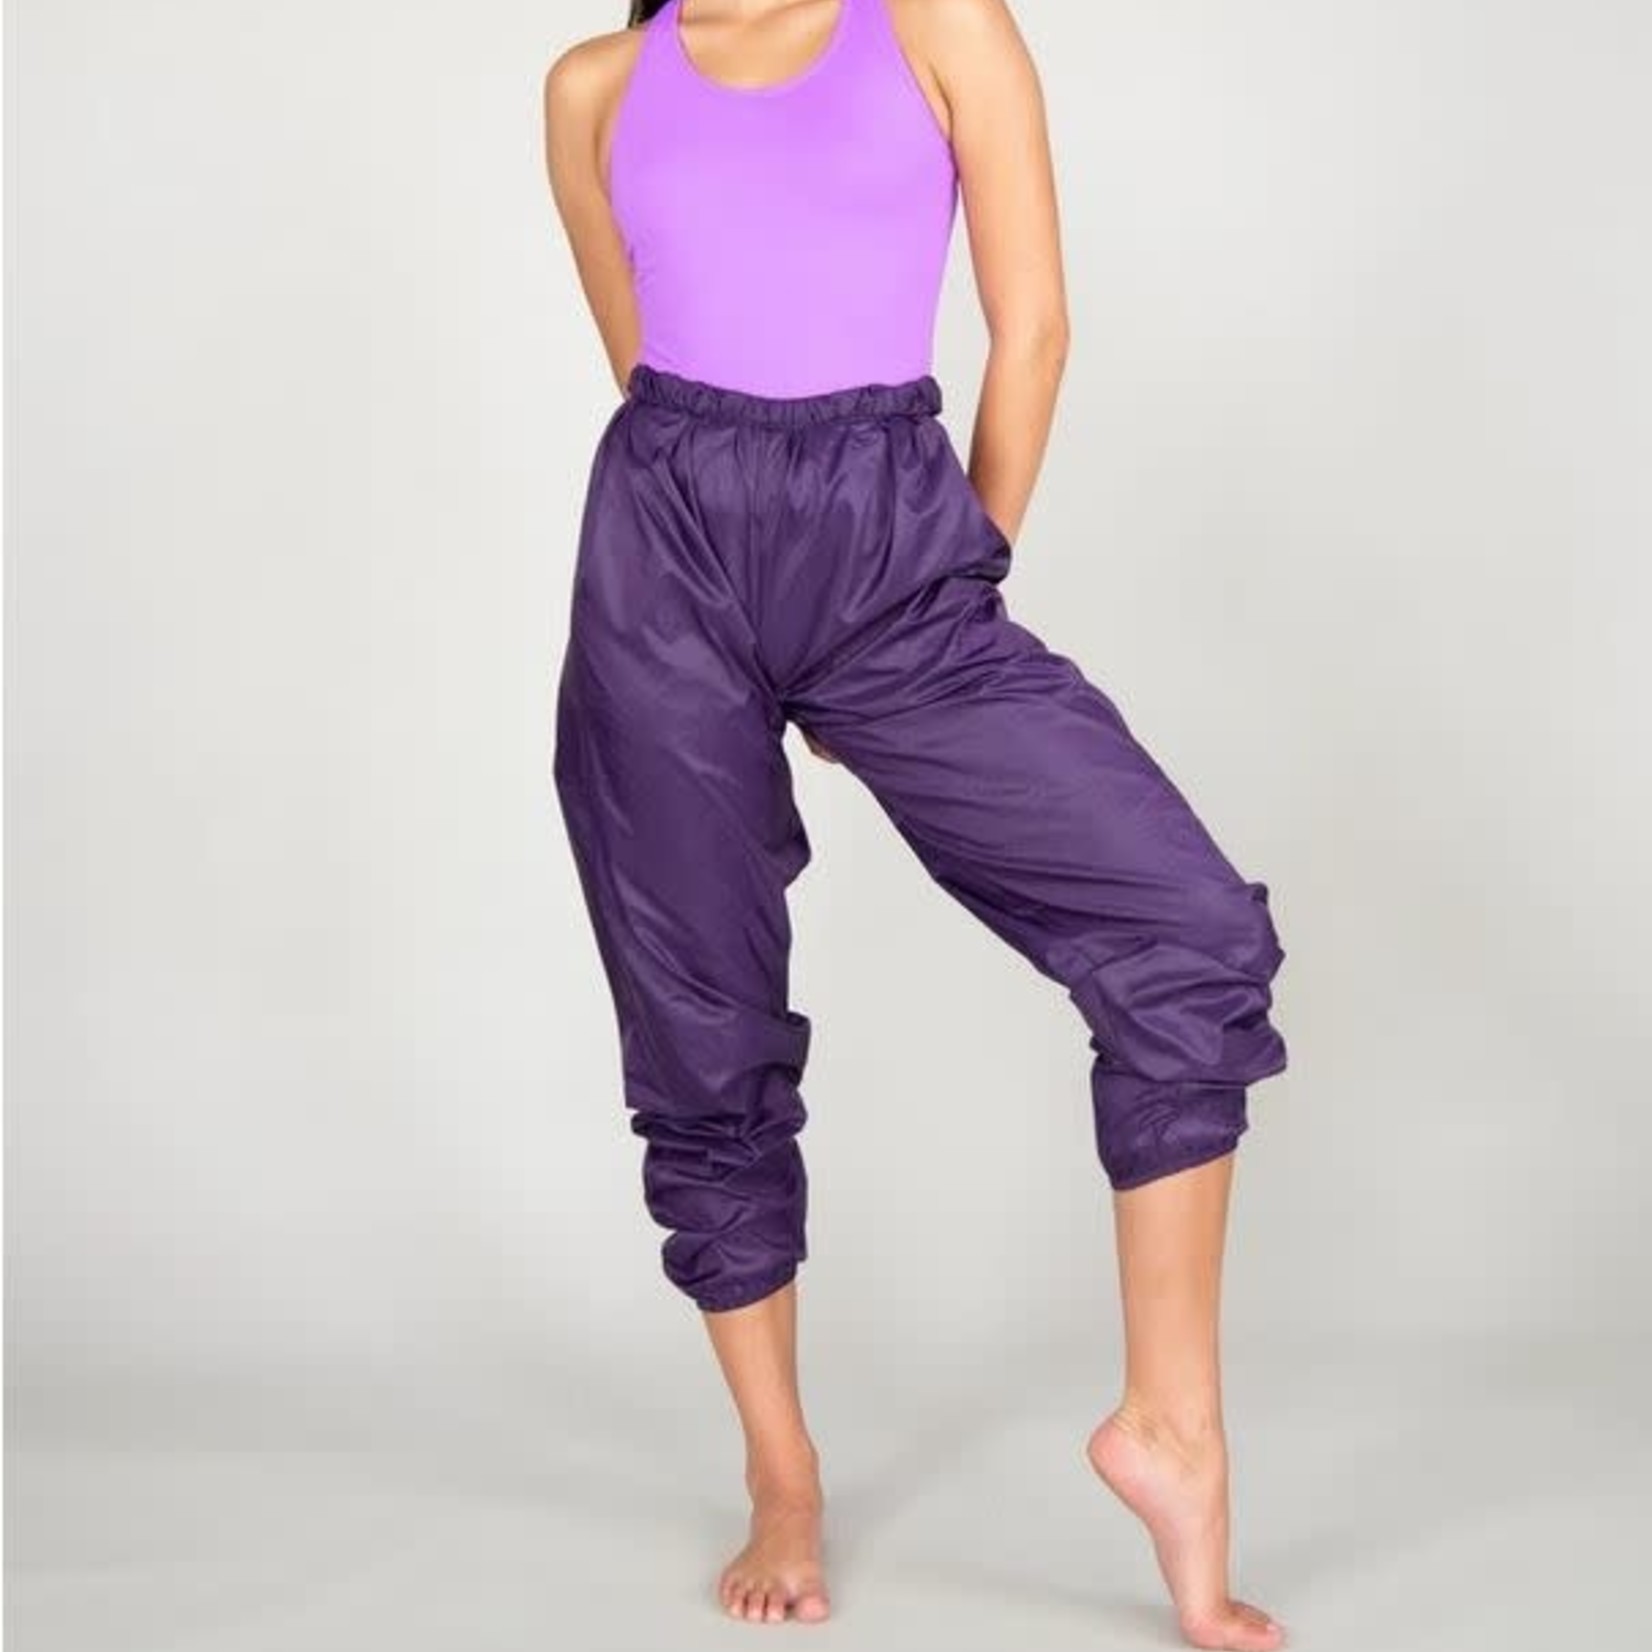 Body Wrappers Body Wrappers 701 Warm-up Pants